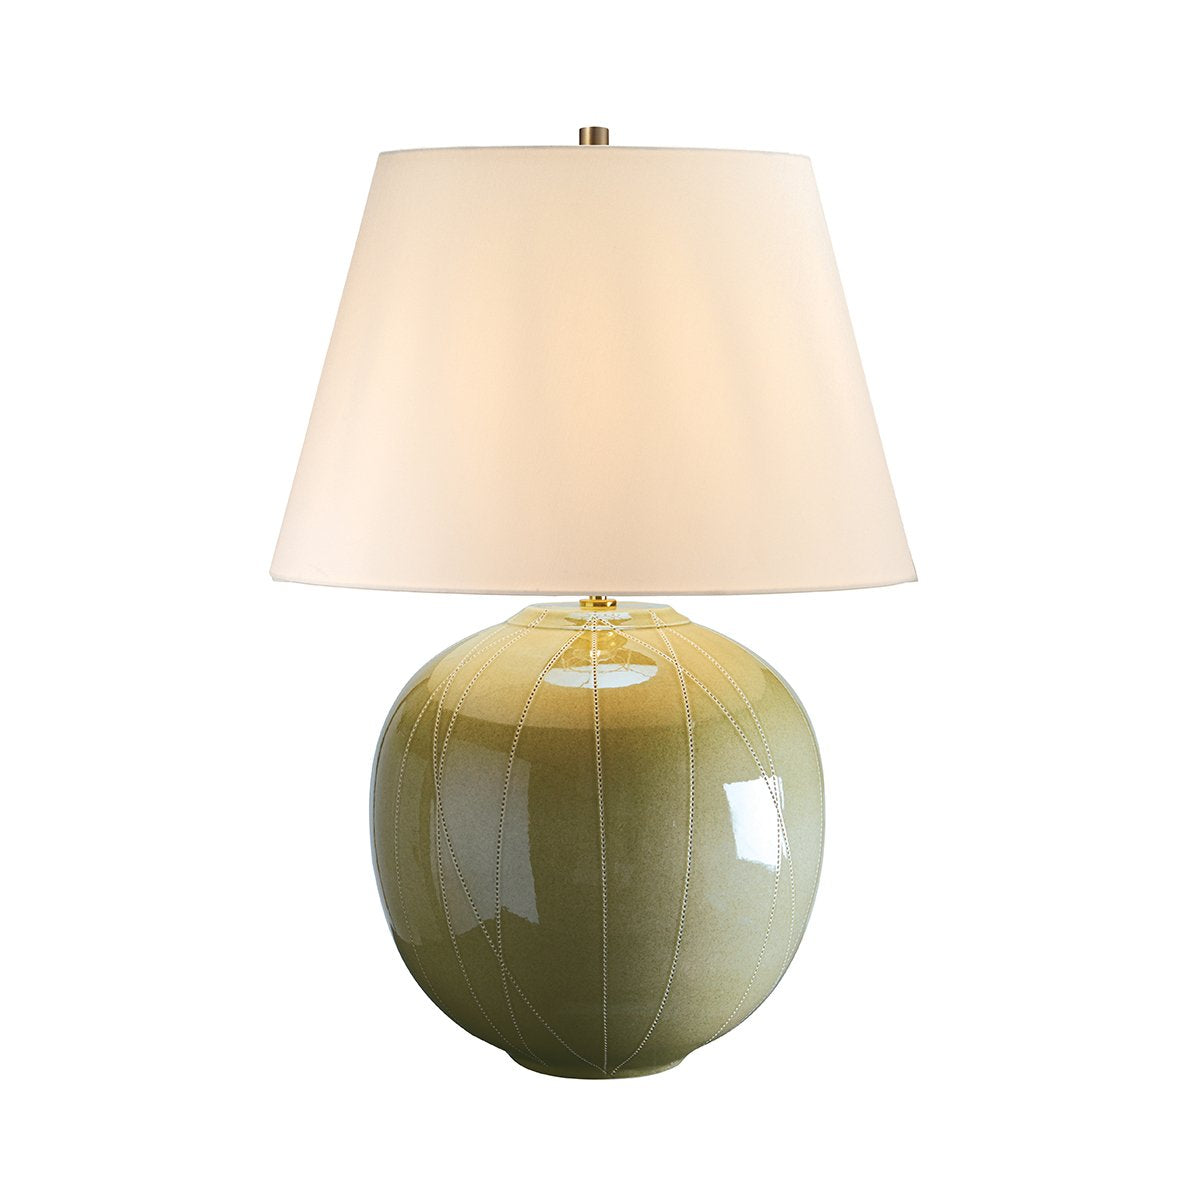 Chadwell Large Green Table Lamp c/w Shade - ID 8330